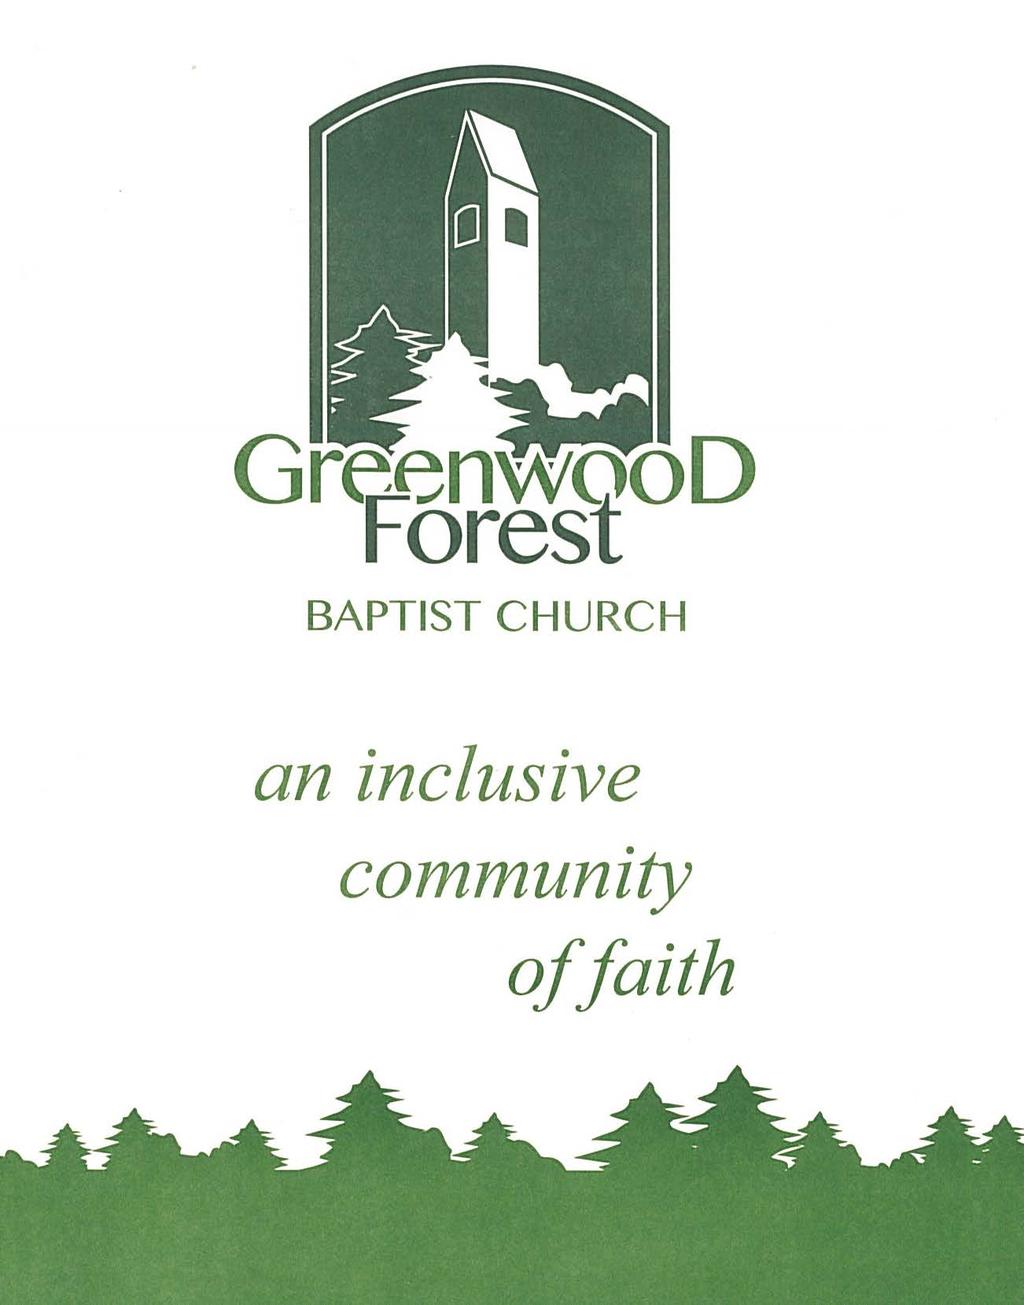 GREENWOOD FOREST BAPTIST CHURCH The Worship of God Baptism of Our Lord Sunday January 14, 2018 Chiming of the Hour Processional Hymn 255 Welcome to Worship Leader: The Lord be with you People: And